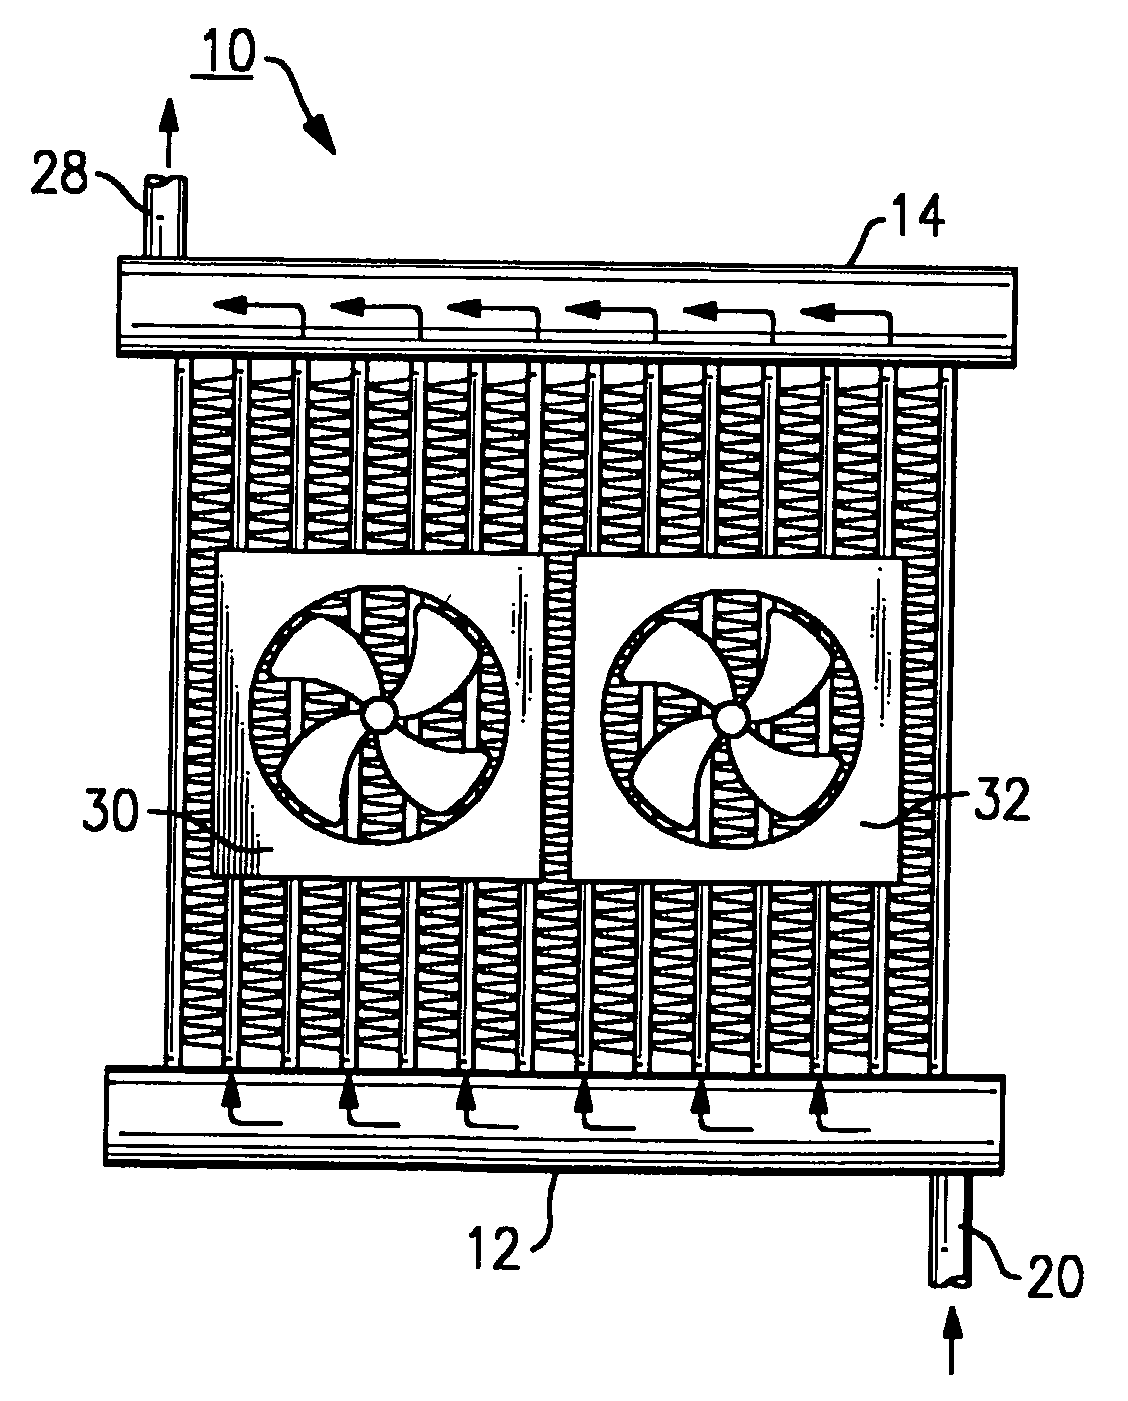 Pulse Width Modulation Or Variable Speed Control Of Fans In Refrigerant Systems